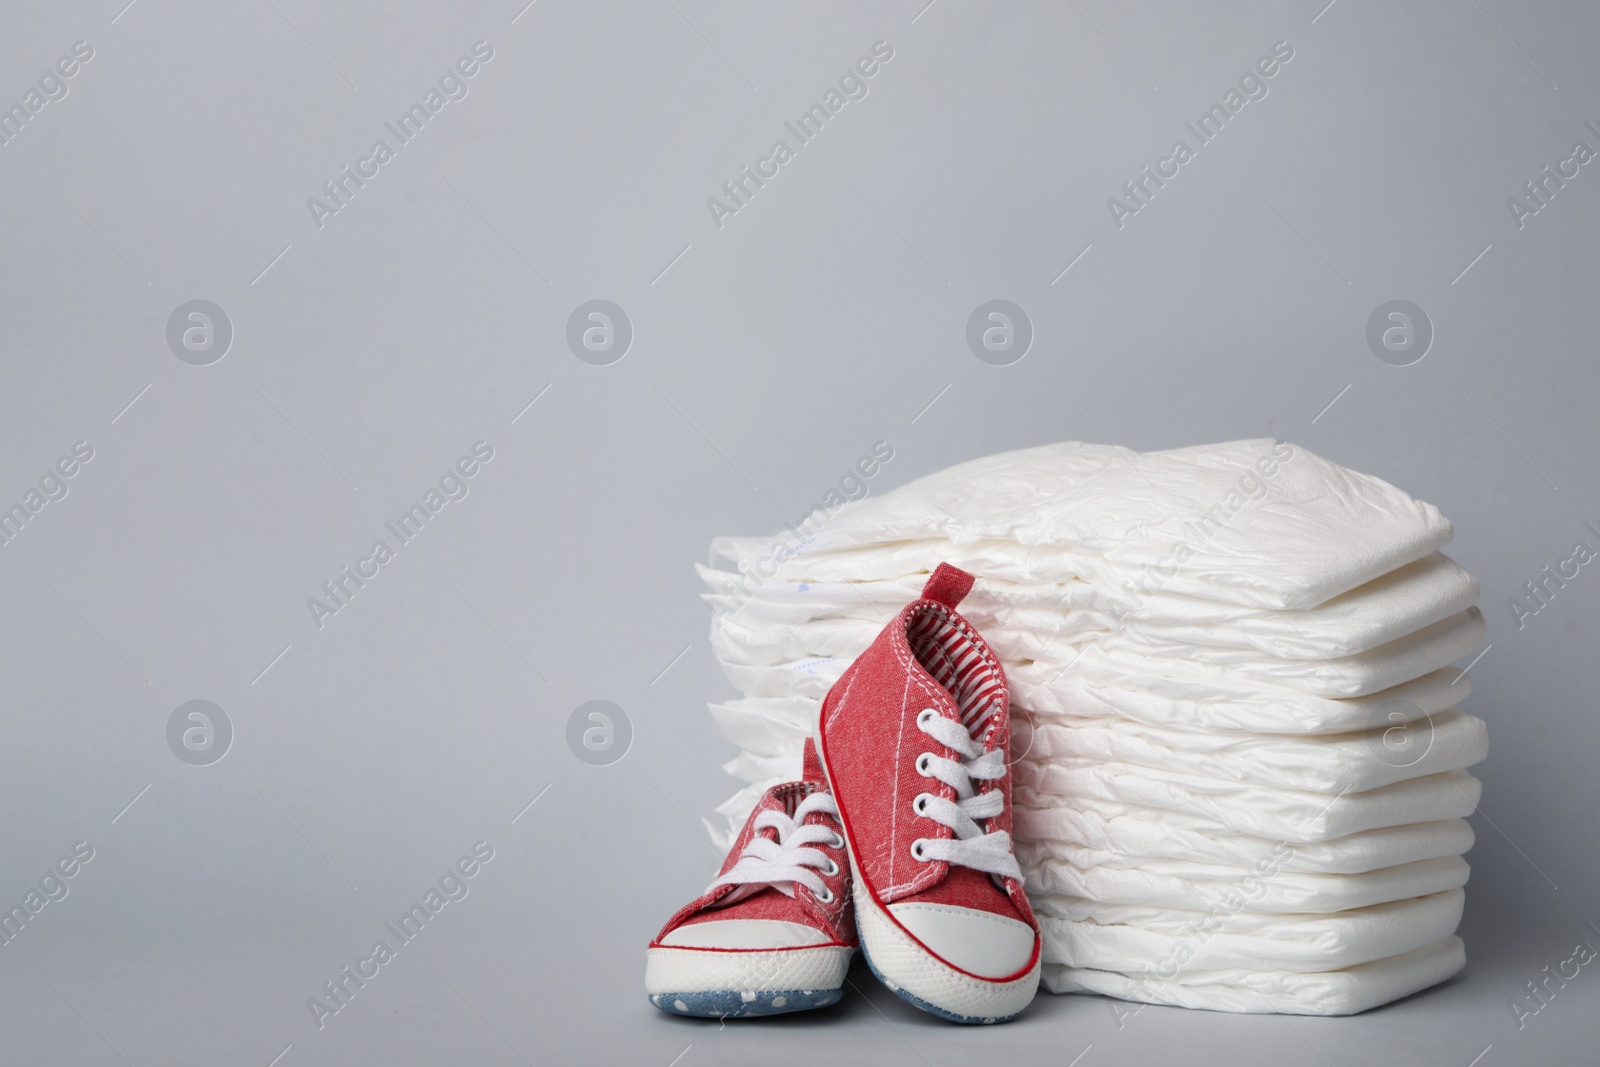 Photo of Diapers and baby shoes on light grey background. Space for text